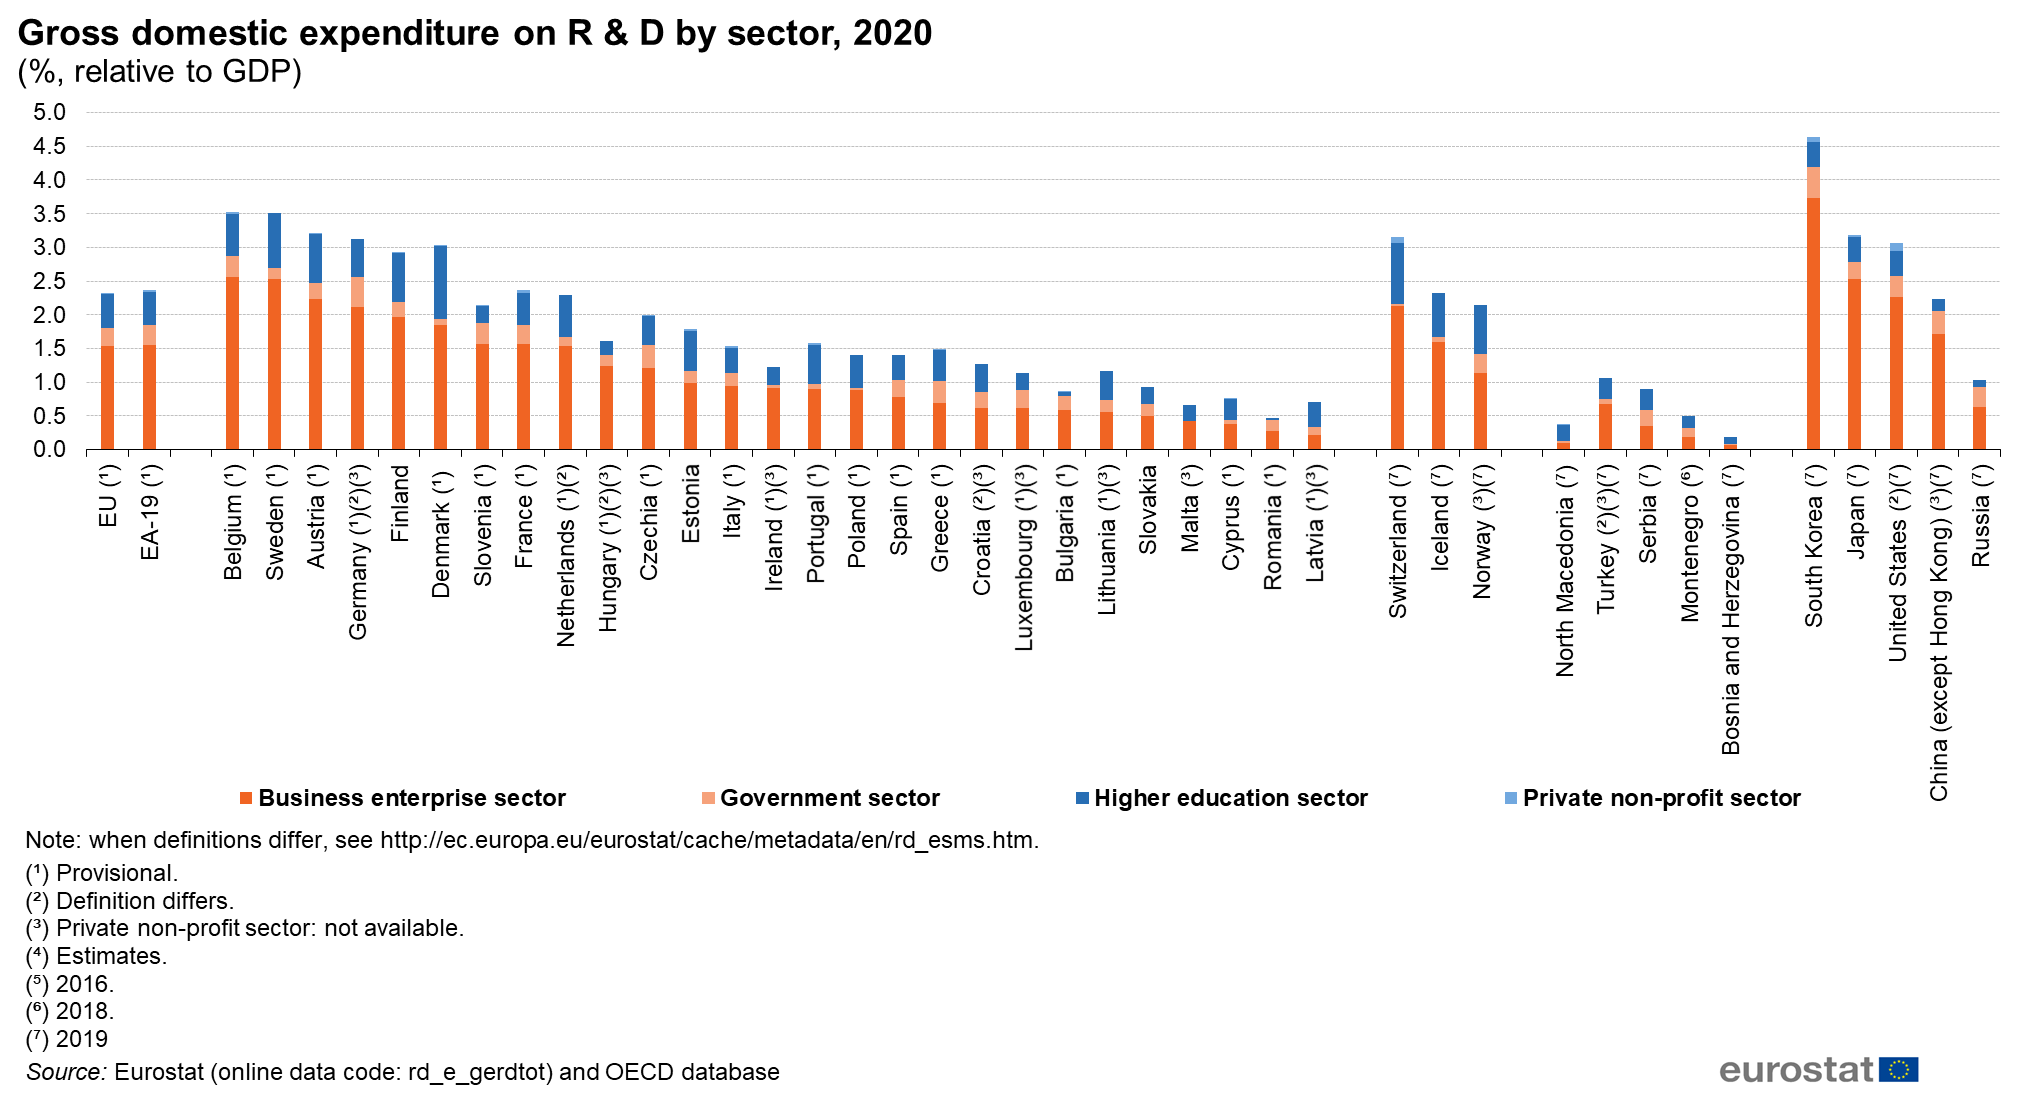 Сайте gde. Expenditure approach GDP. USA GDP by sector. R&D spending by sector 2020. Residents sector GDP.